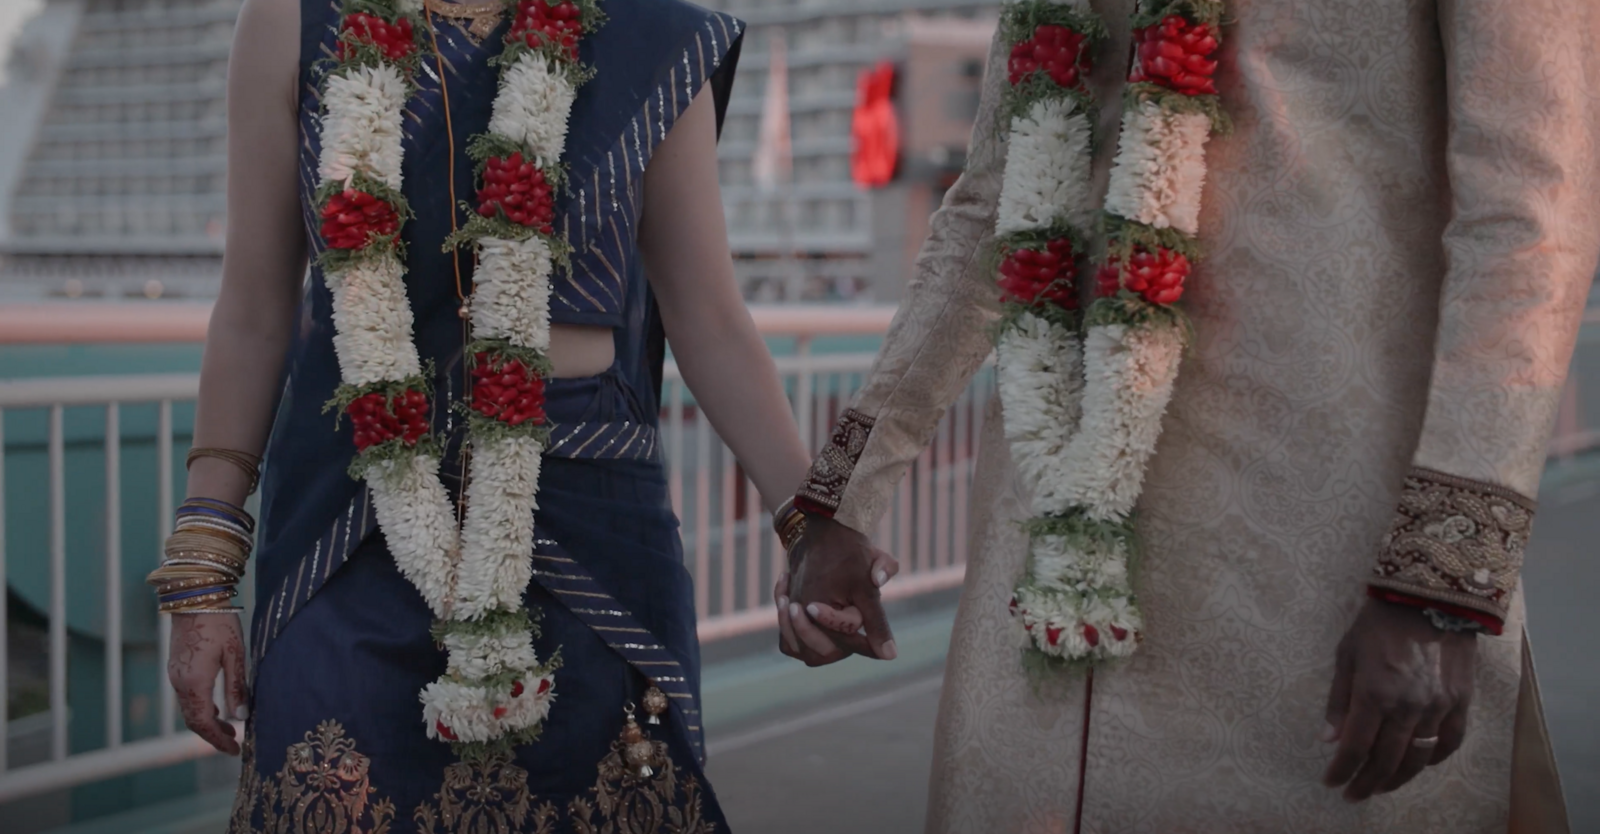 Megan + Anand holding hands in their traditional Indian wedding attire